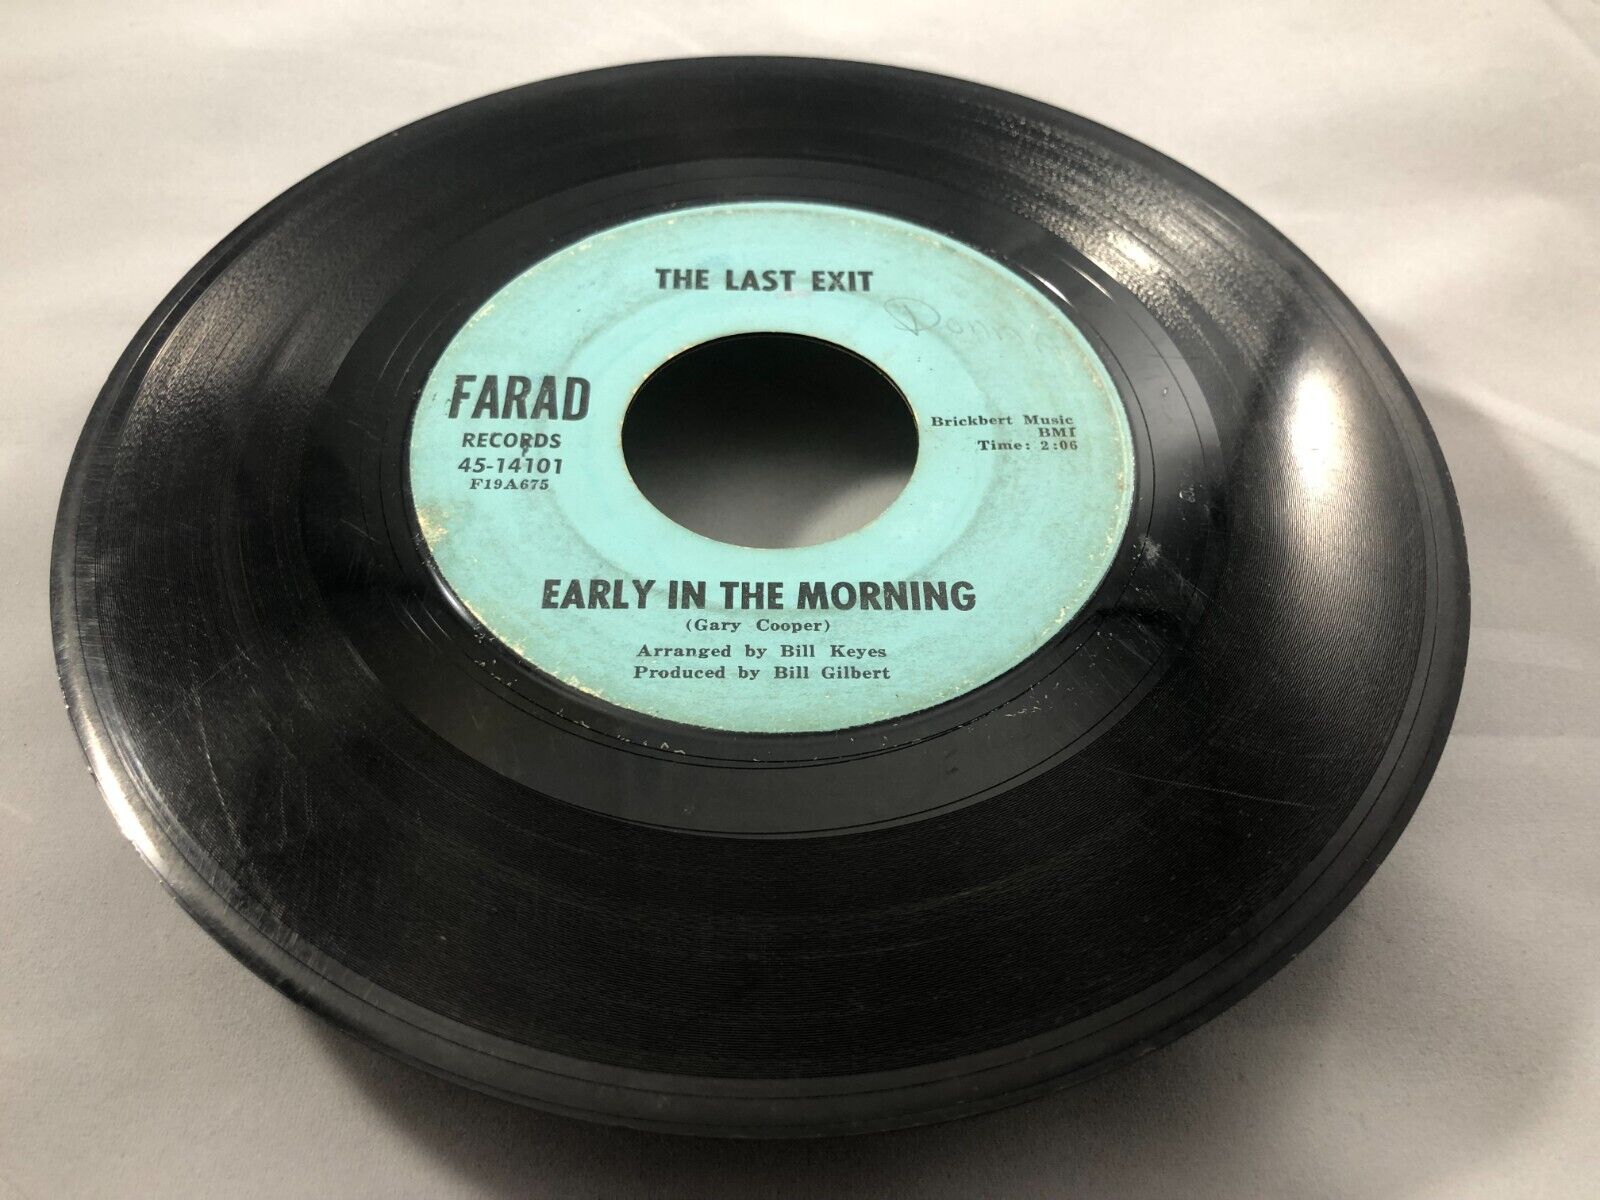 The Last Exit Early in the Morning European Traveler Farad Records 45 rpm garage